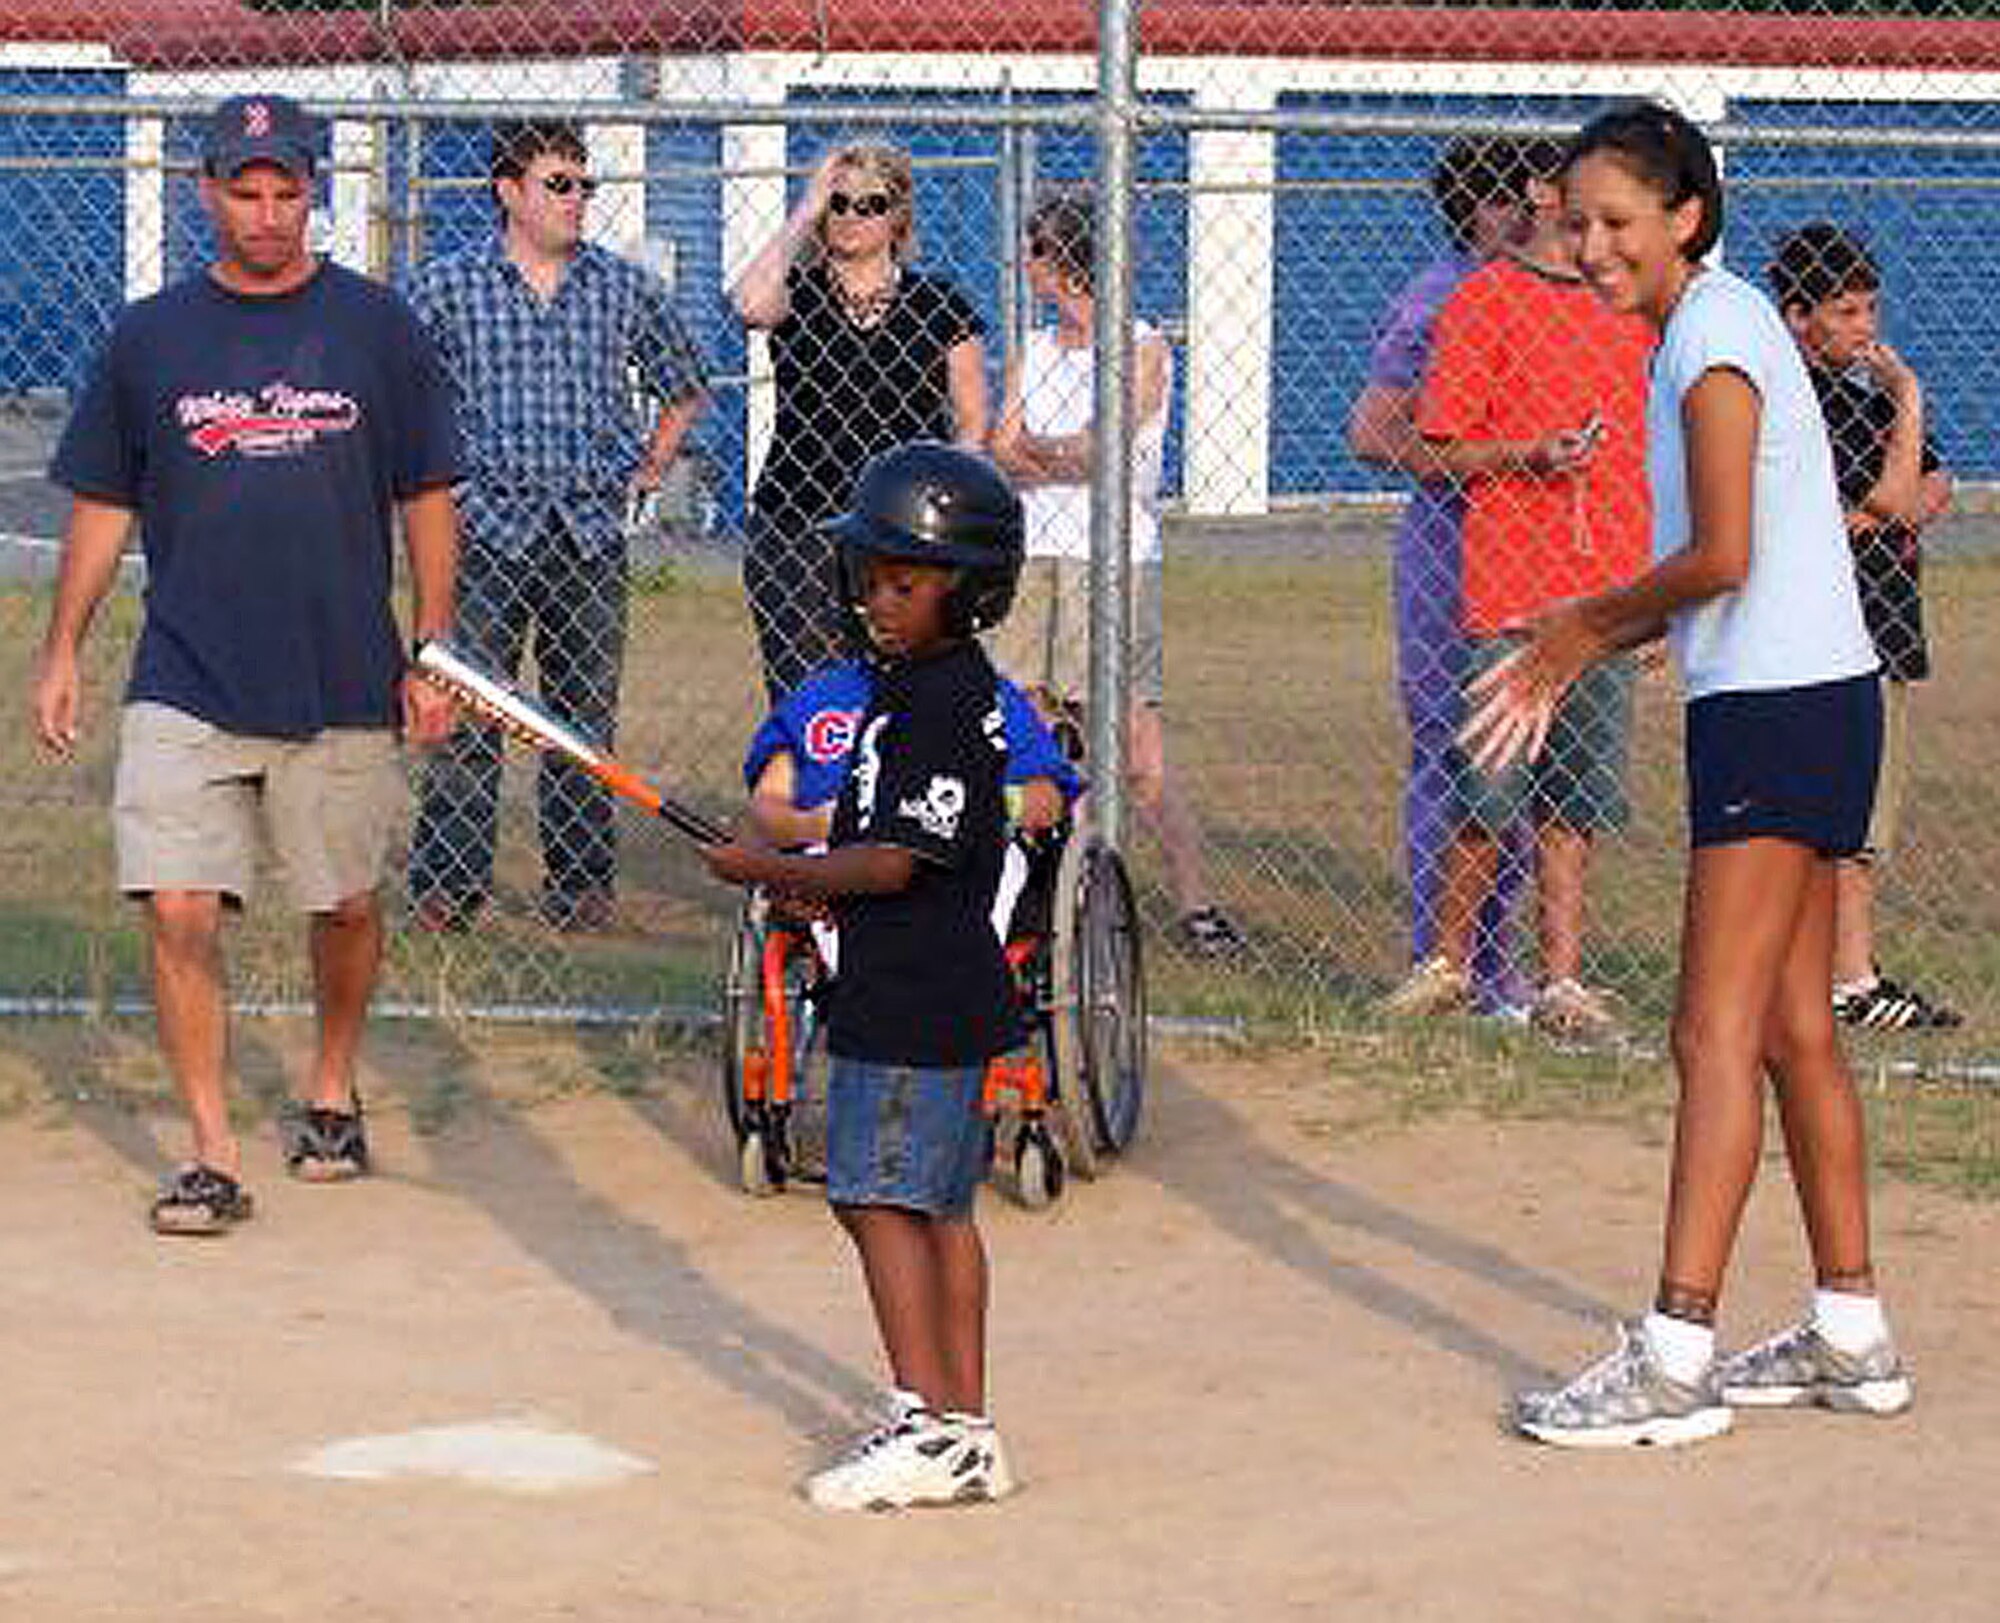 Staff Sgt. Ortega looks on as Jamarco gets ready to hit. The non-profit organization is set up to allow disabled children the chance to round the bases, get some hits, make friends and have fun. (Courtesy Photo)